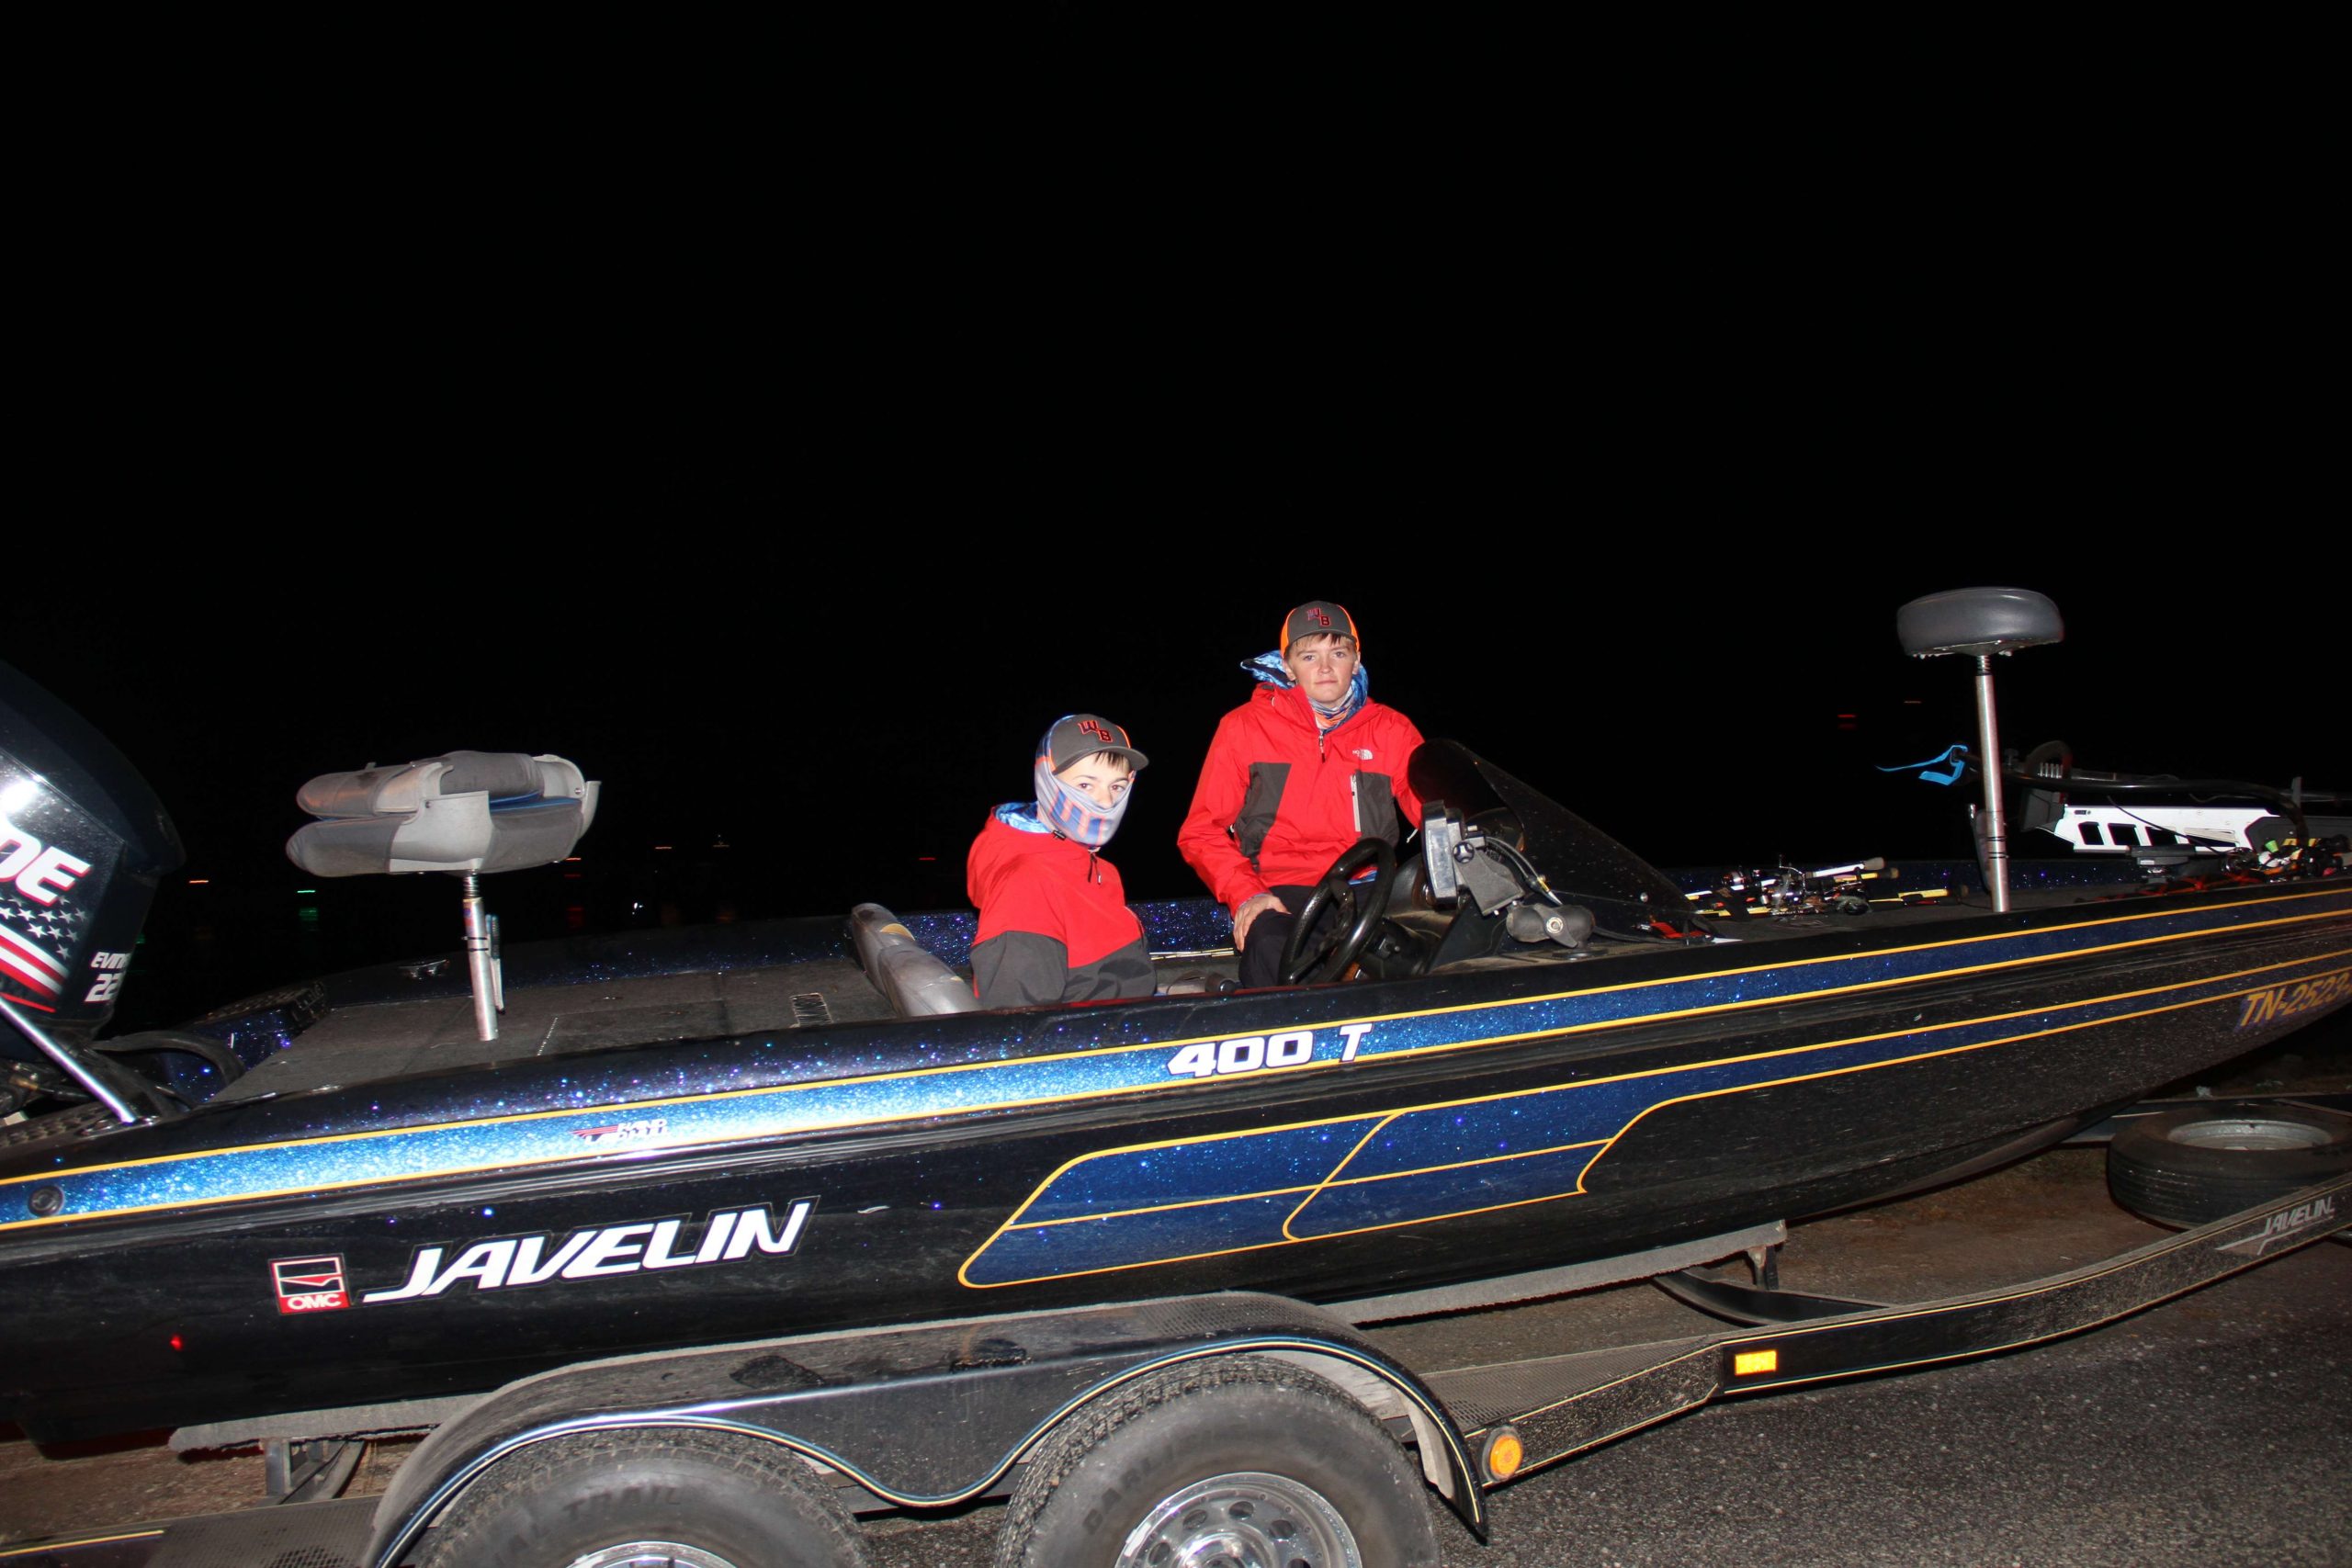 Here are some more photos from the anglers' day on the water. 